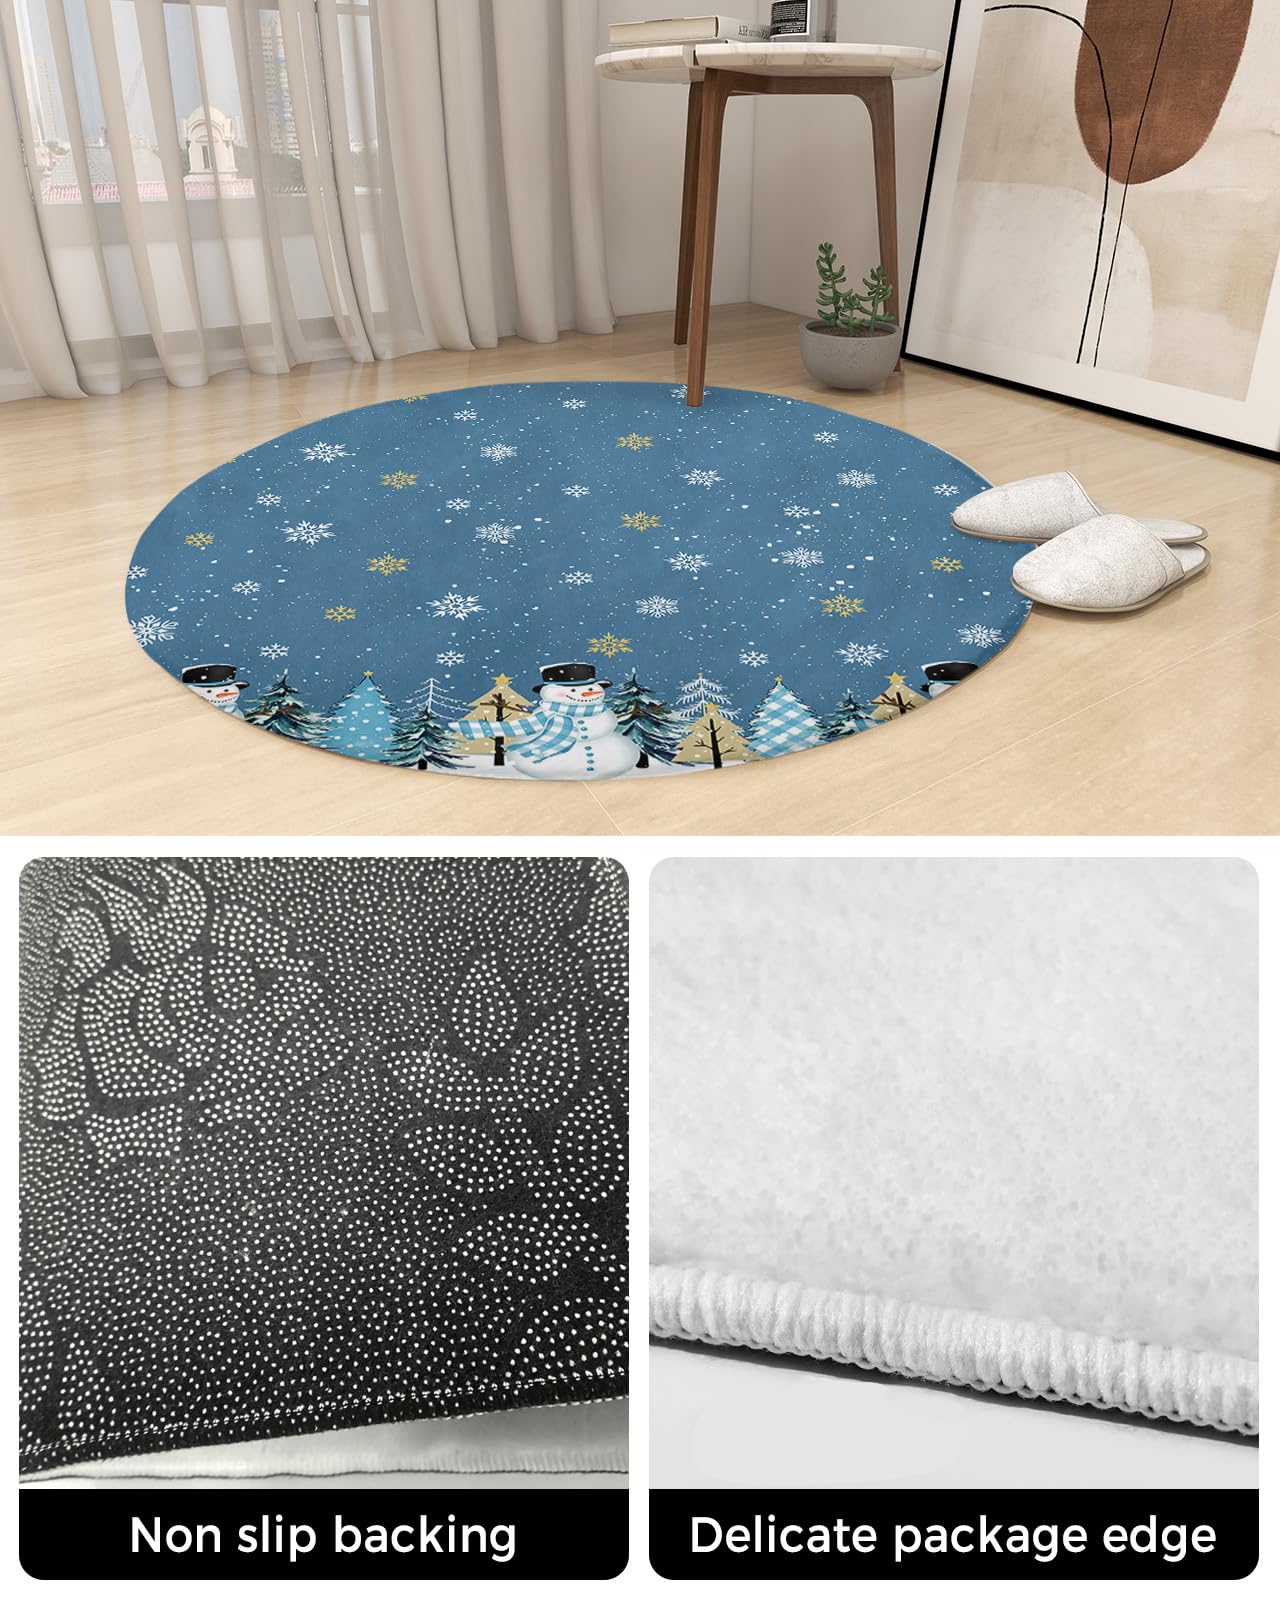 Christmas Snowman Fluffy Round Area Rug Carpets 3.3ft, Plush Shaggy Carpet Soft Circular Rugs, Non-Slip Fuzzy Accent Floor Mat for Living Room Bedroom Nursery Home Decor Blue Winter Tree Snowflake